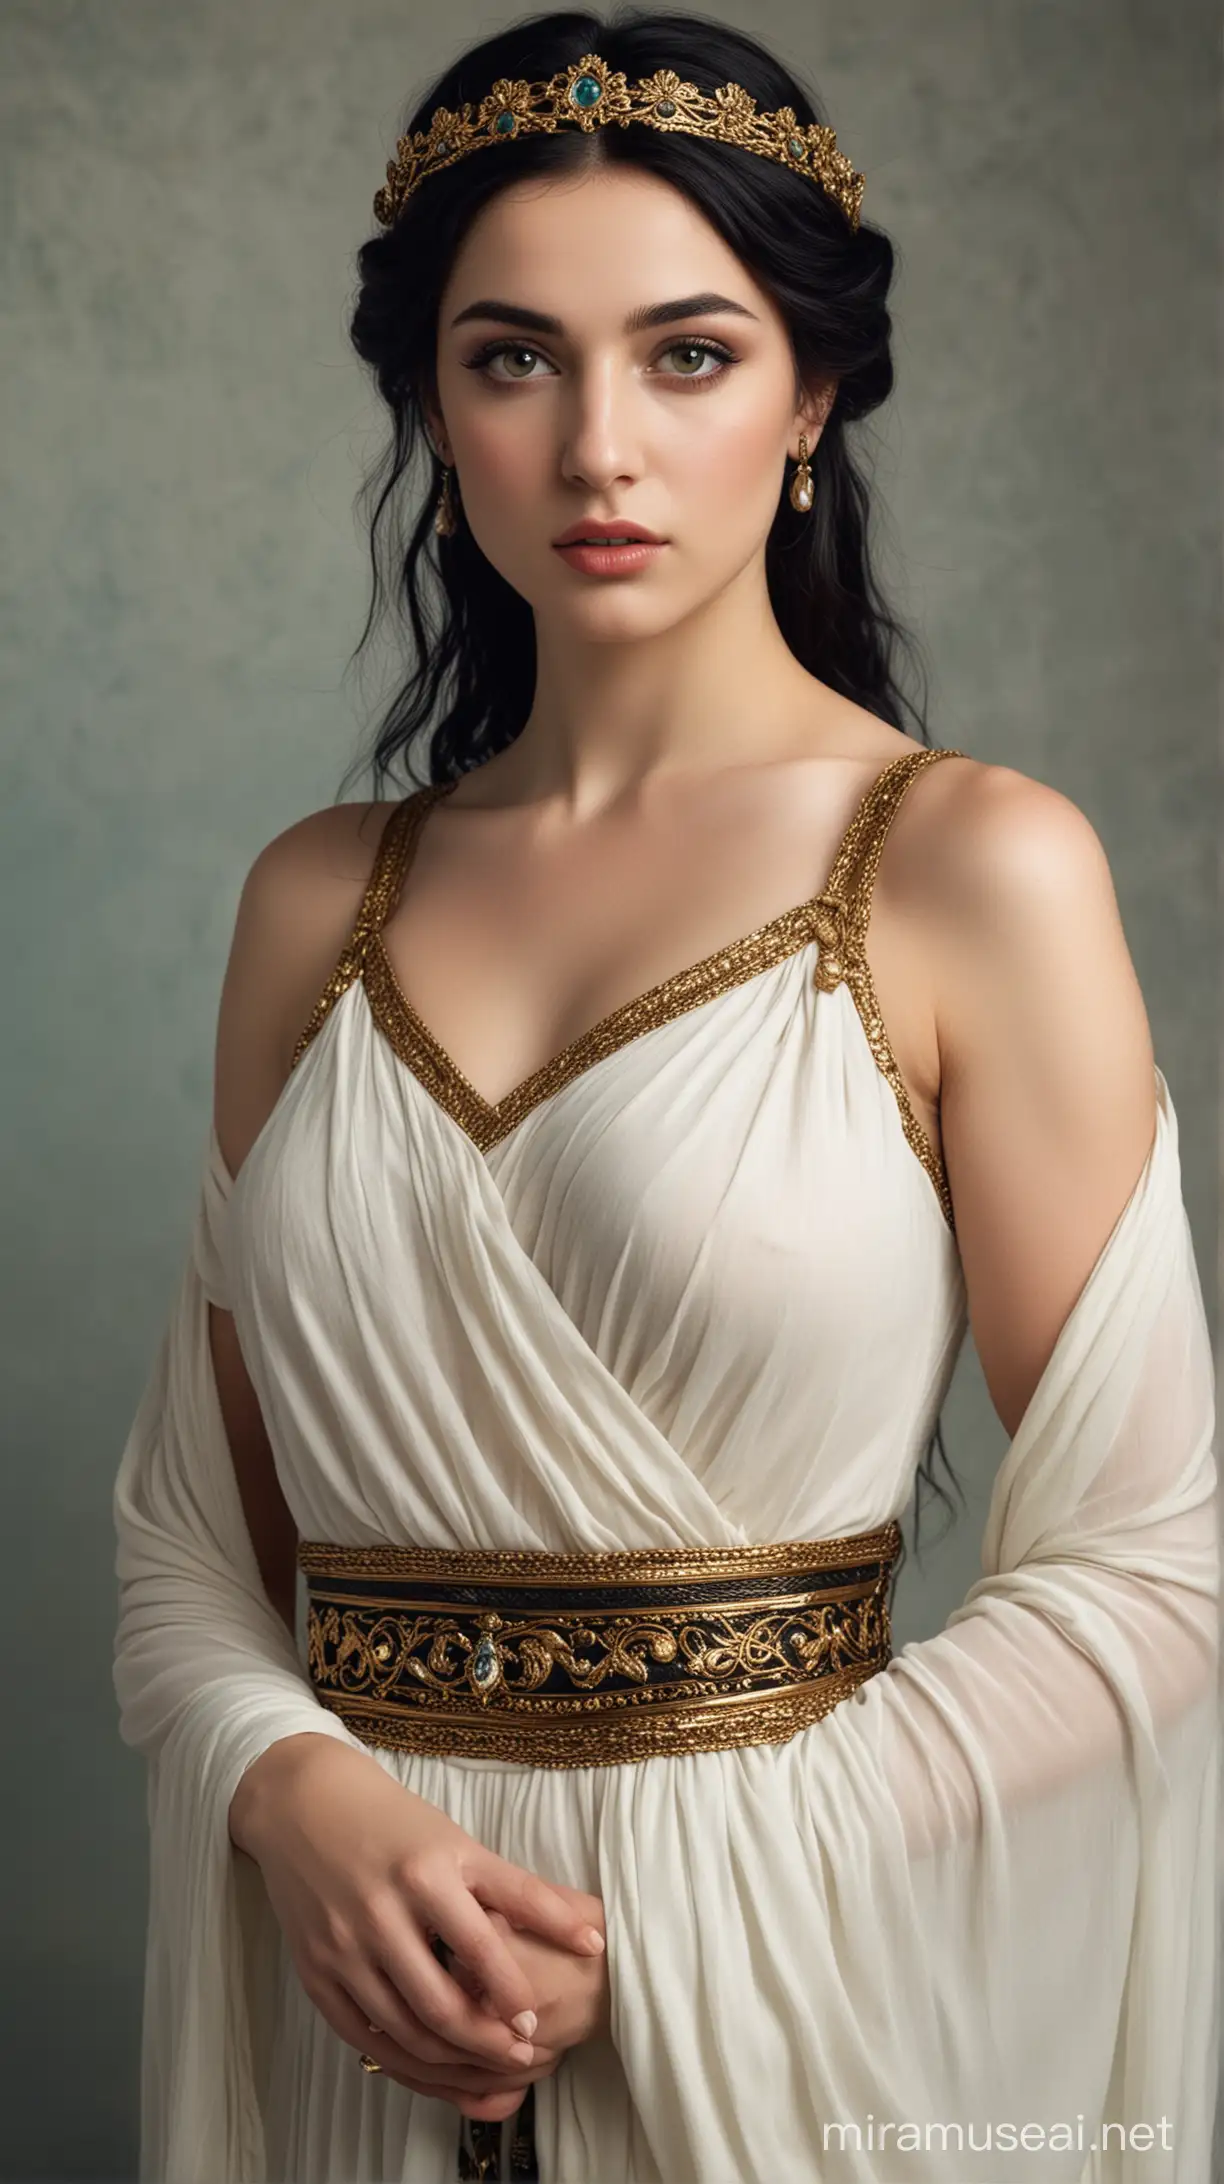 Greek Princess Medea with Fair Skin and Black Hair in Traditional Attire